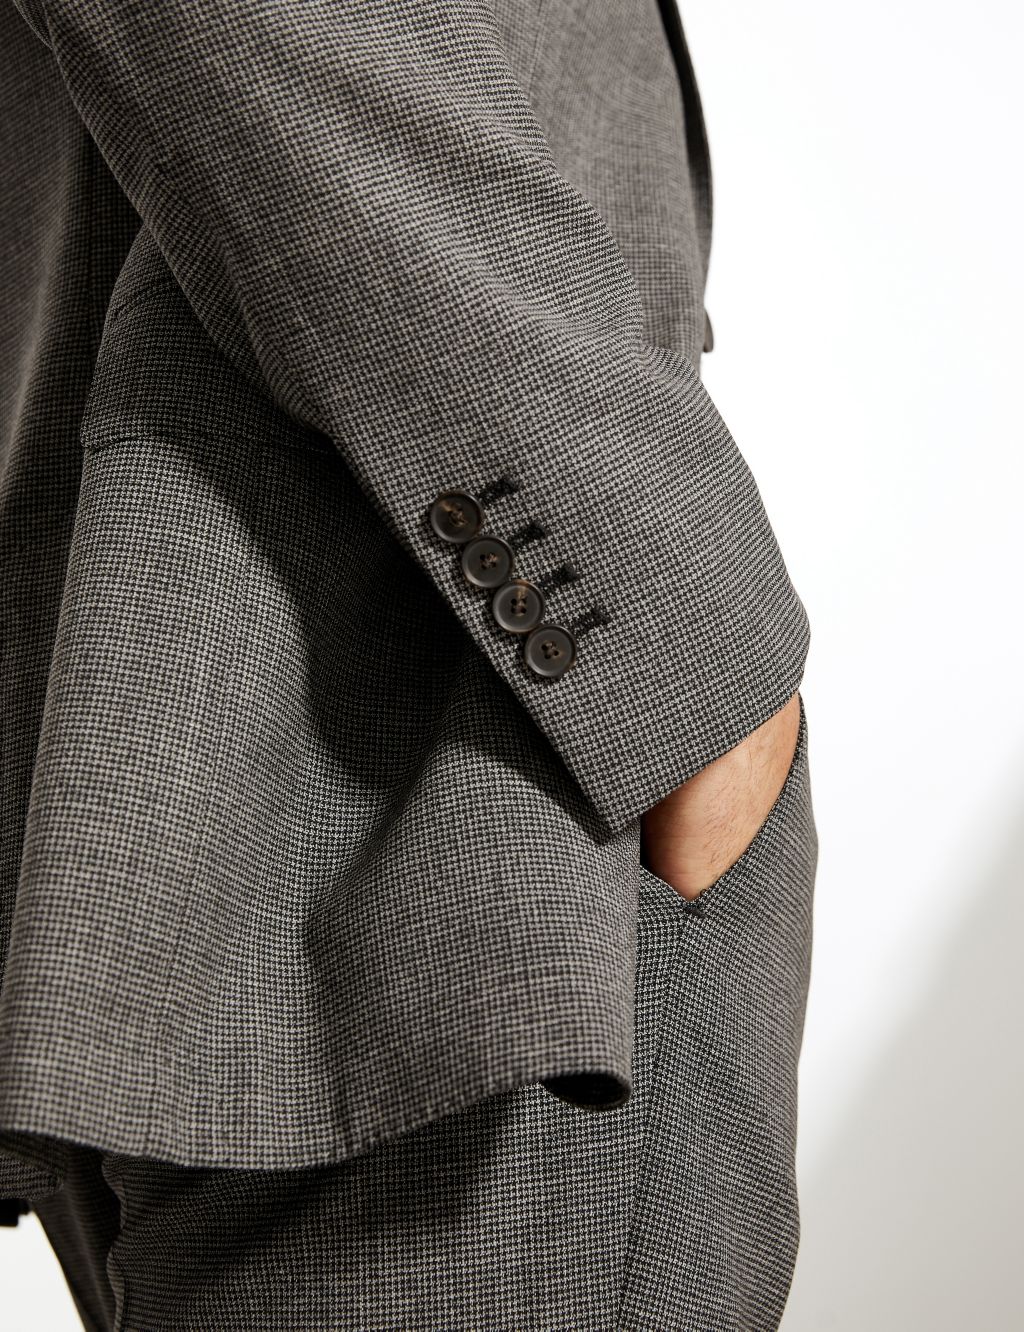 Tailored Fit Bi-Stretch Puppytooth 2 Piece Suit image 7